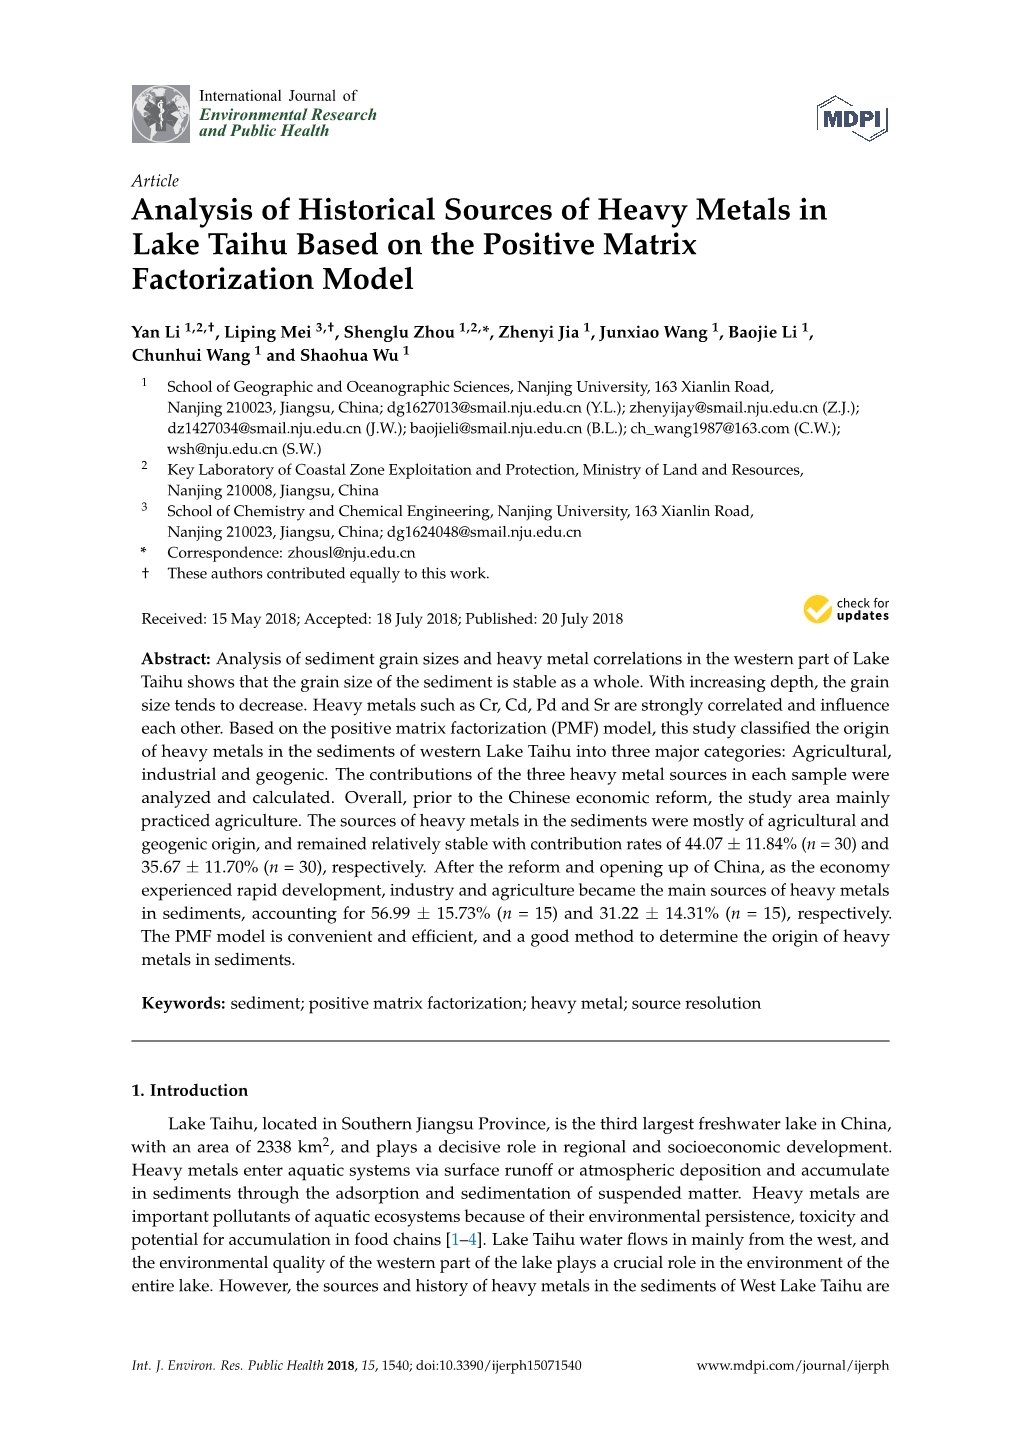 Analysis of Historical Sources of Heavy Metals in Lake Taihu Based on the Positive Matrix Factorization Model